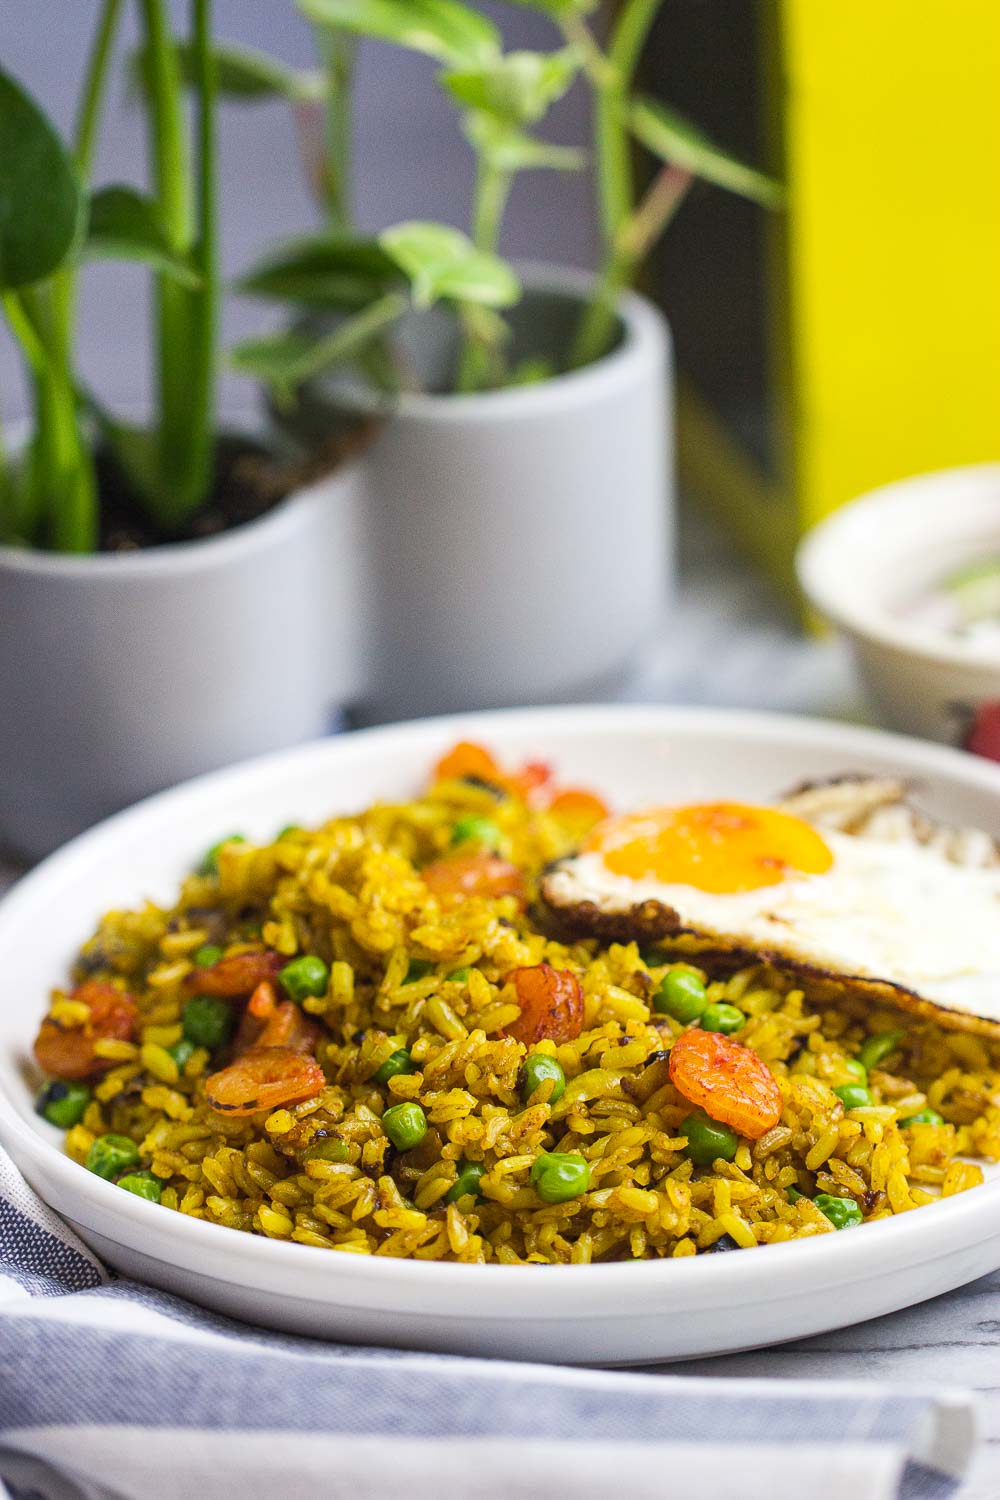 This skillet Turmeric Fried Rice (Indonesian Nasi Goreng Kunyit) recipe is a quick 30-minute meal that’s easy to make, flavorful, and only requires one pan. Great weeknight meal the entire family will love!